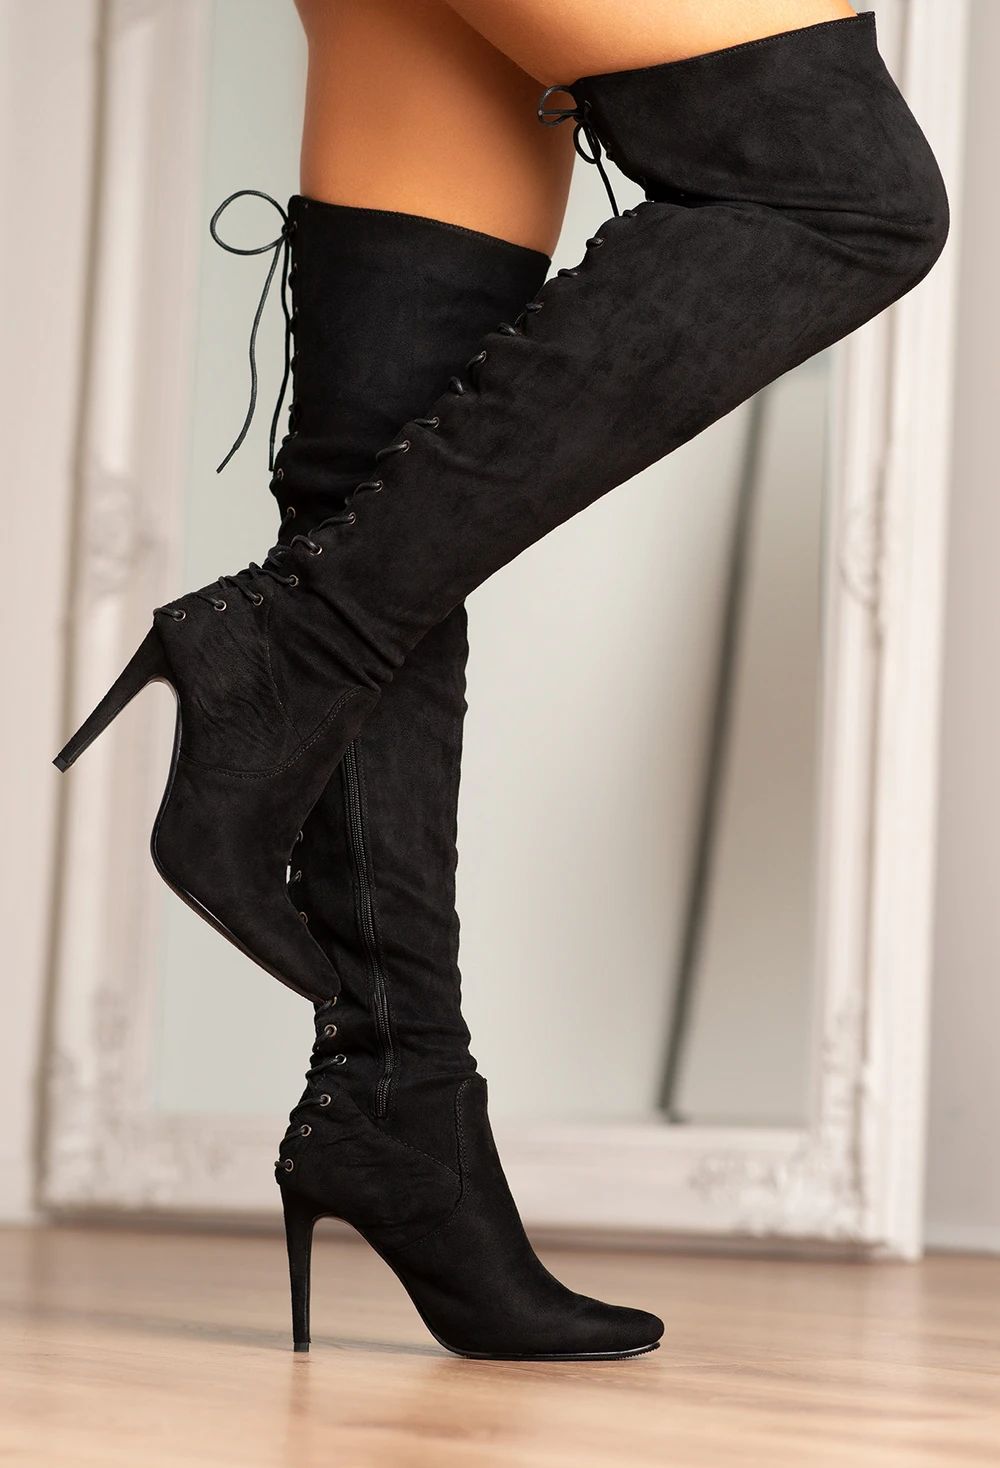 Sultry Nights Black Lace Up Knee High Stiletto Boot